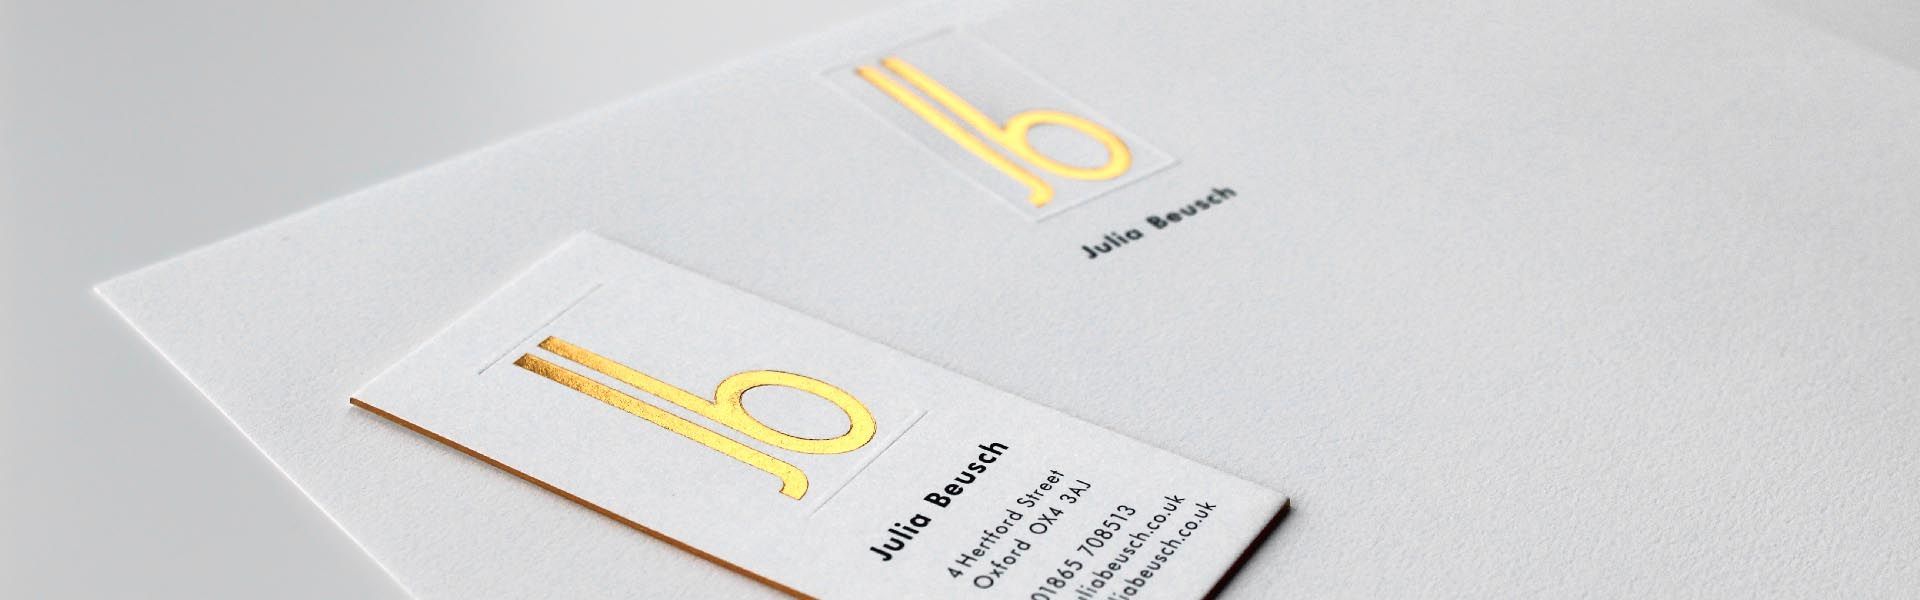 a business card for julia bausch sits on a piece of paper